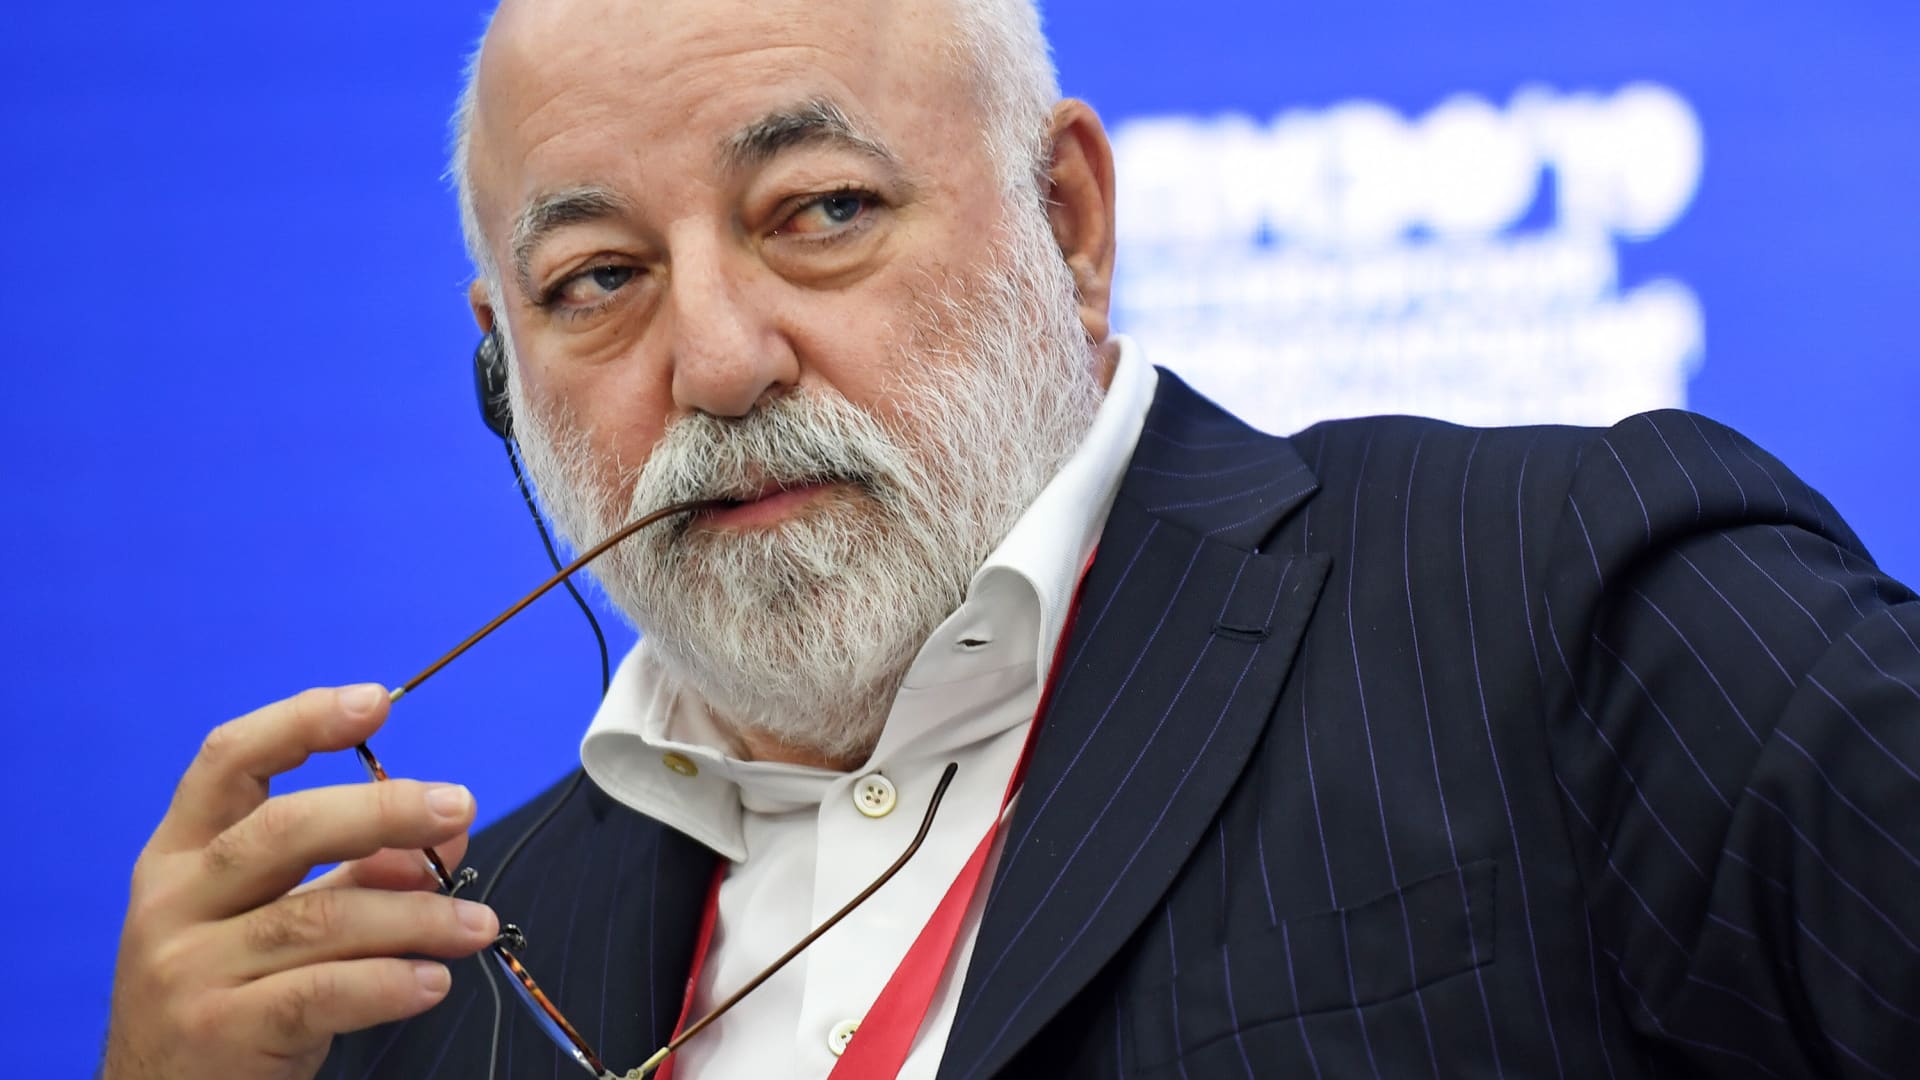 Viktor Vekselberg, Russian billionaire, pauses during a panel session at the St. Petersburg International Economic Forumin St. Petersburg, Russia, on Friday, June 7, 2019.